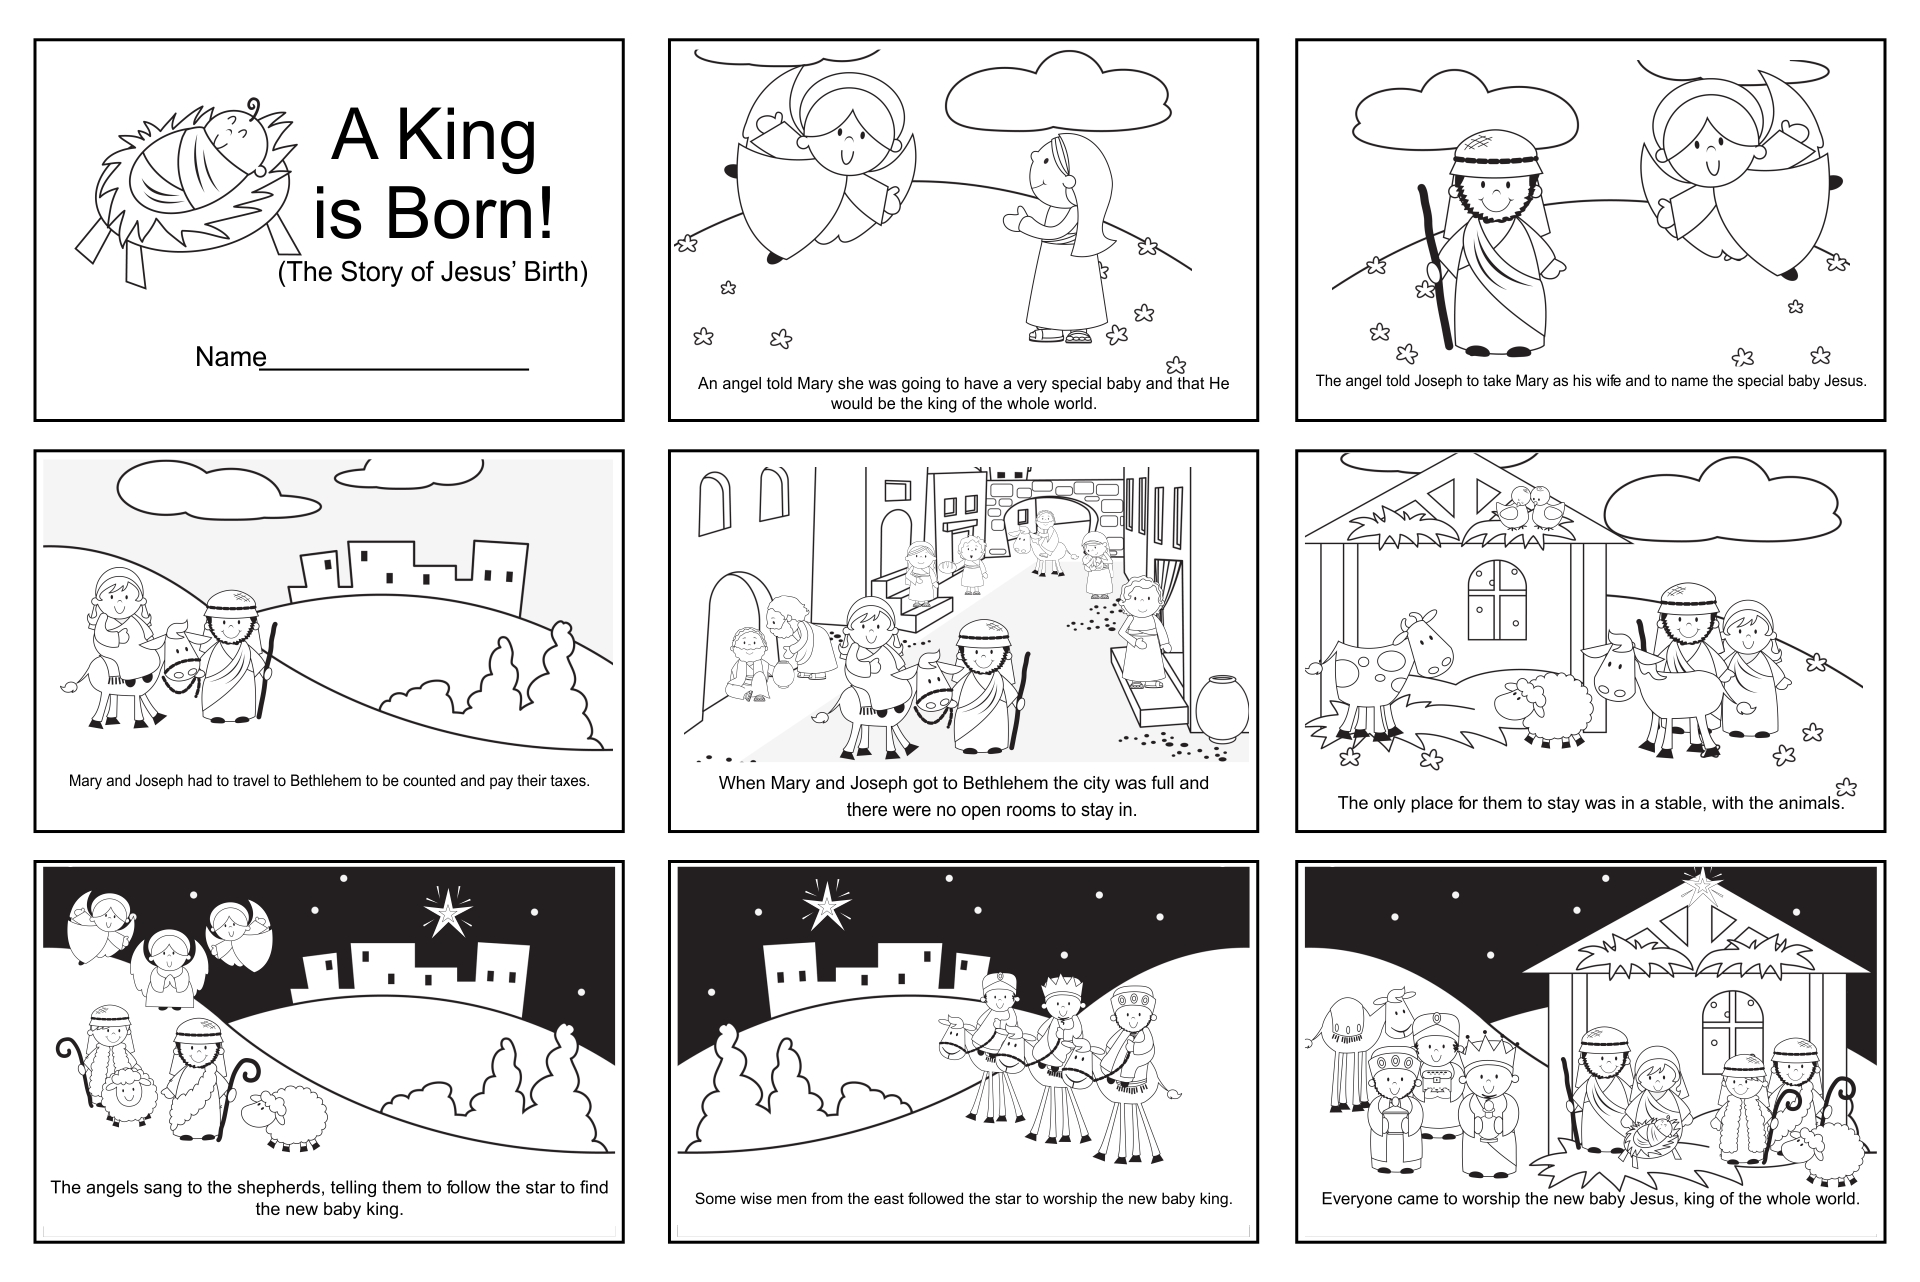 7-best-images-of-nativity-story-printable-book-printable-nativity